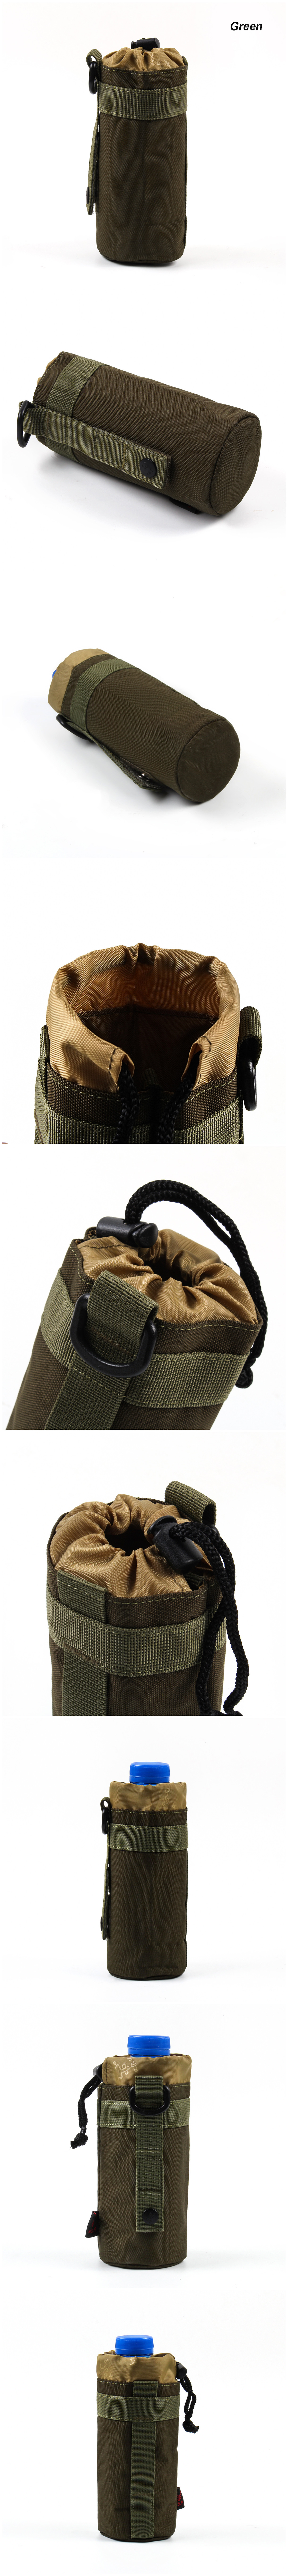 Outdoor-Fishing-Camping-Hiking-Bag-Water-Bottle-Bag-Kettle-Pouch-993966-3